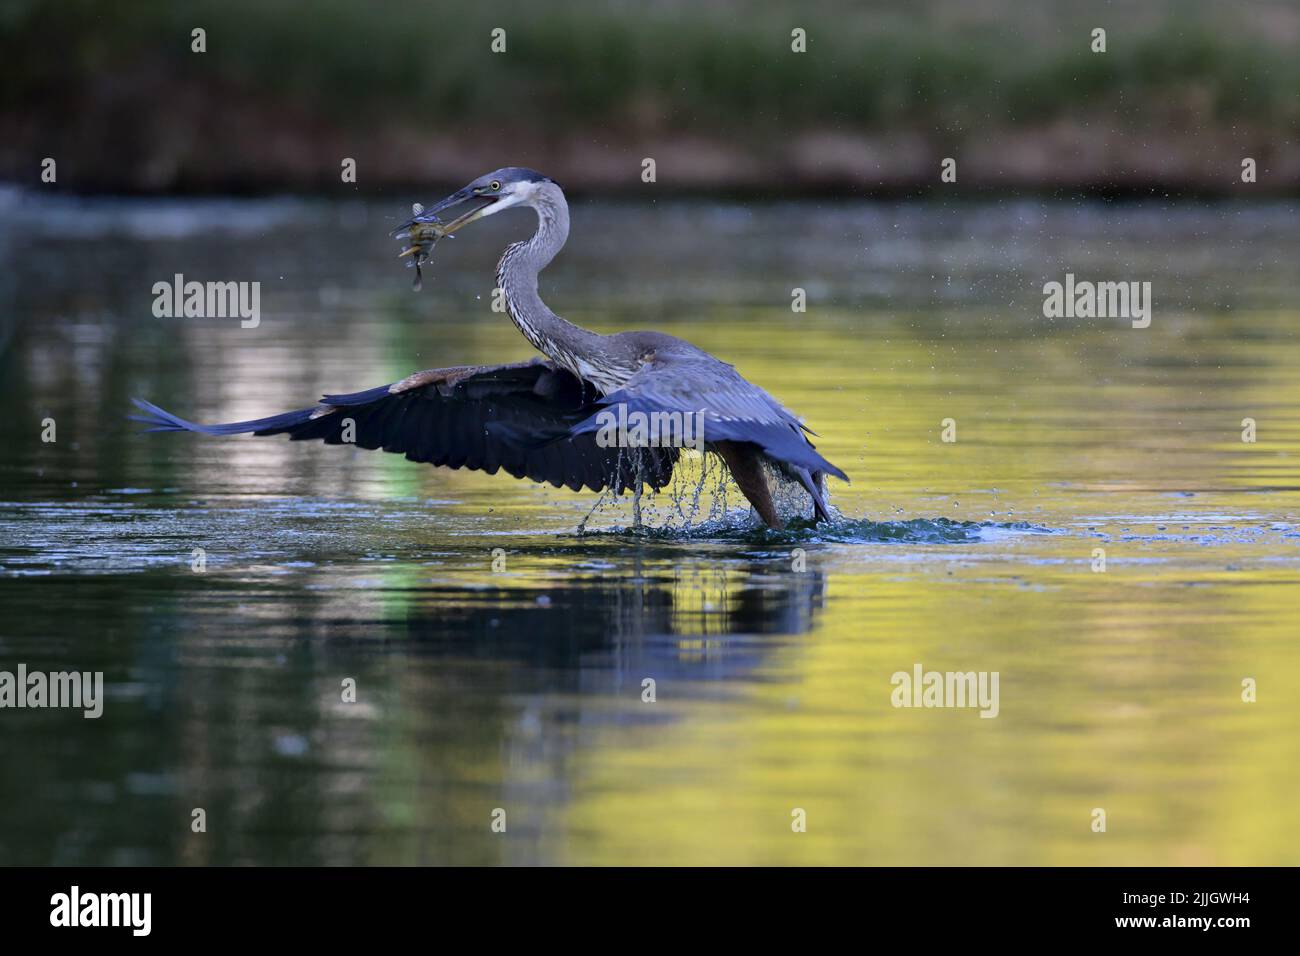 Delicious fish catch by Great Blue Heron in sunlit, urban pond at Fort Lowell Park in Tucson, Arizona, United States Stock Photo